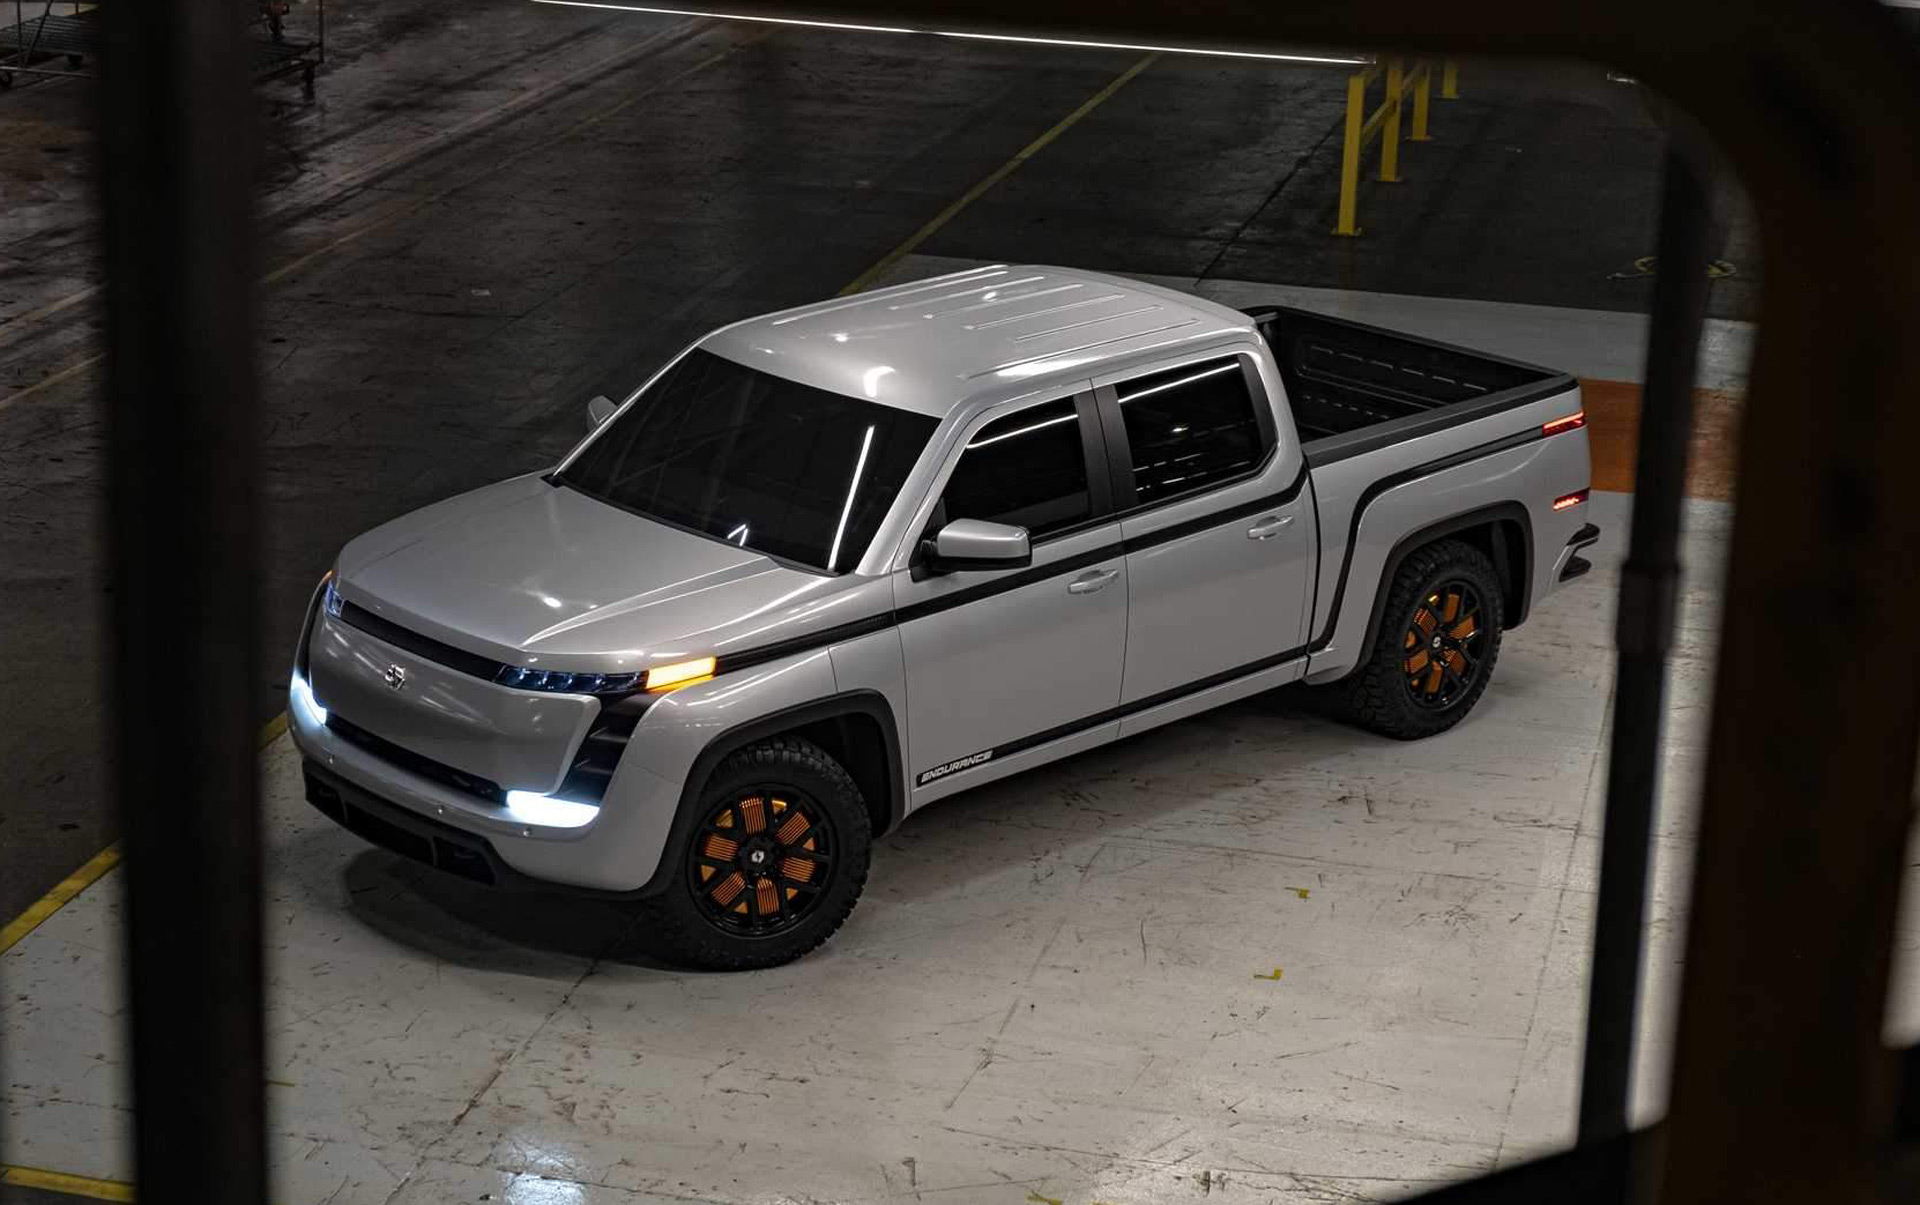 Lordstown Endurance electric pickups will be delivered in 2022, claims Foxconn chairmanLordstown Endurance electric pickups will be delivered in 2022, claims Foxconn chairman